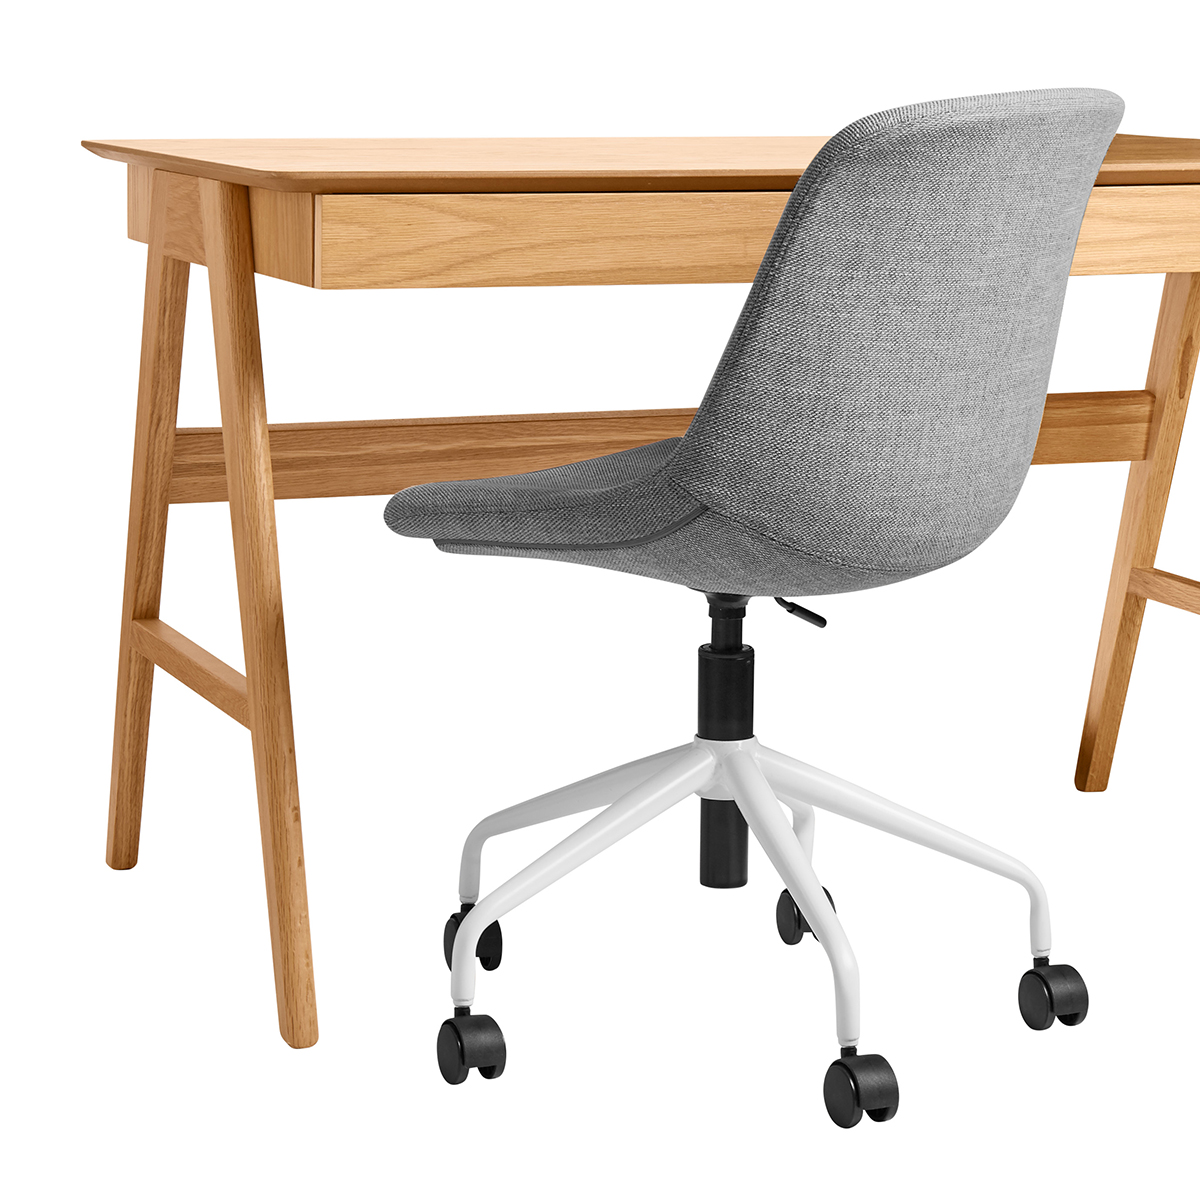 Poppin Rolling Desk Chair | The Container Store